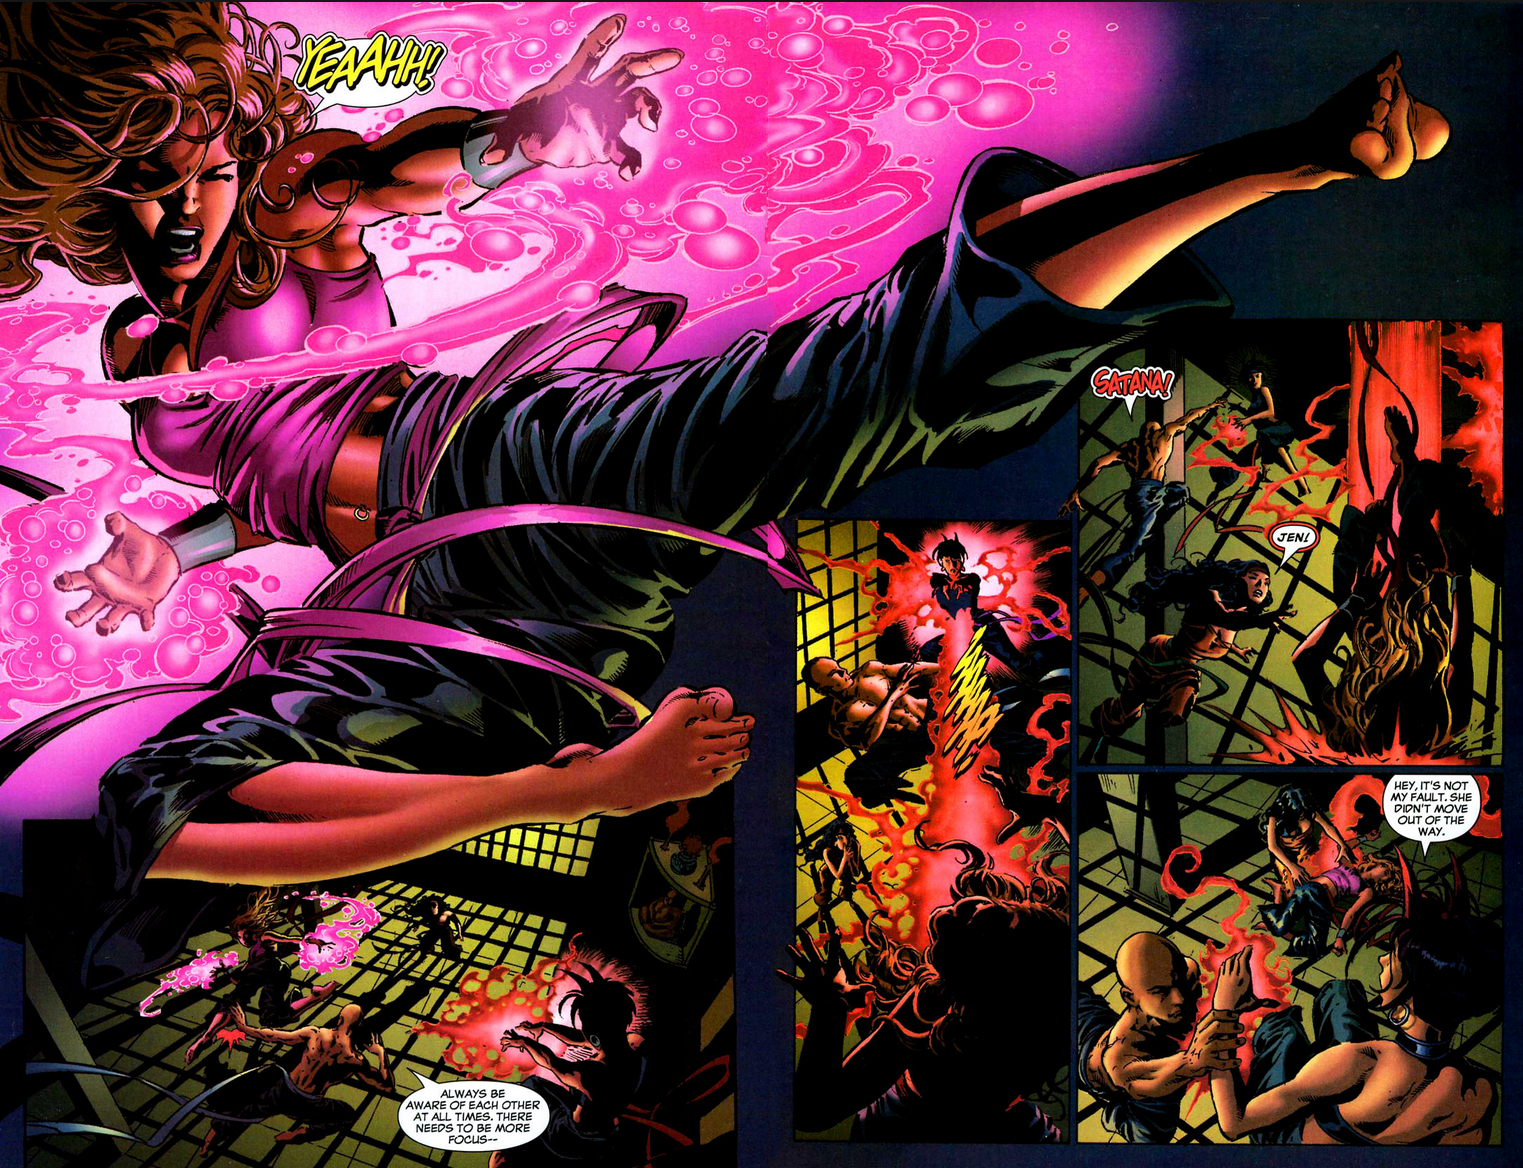 Jennifer Kale trains her body and her mind in Witches Vol. 1 #2 "The Brood' (2004), Marvel Comics. Words by Brian Patrick Walsh, art by Mike Deodato Jr., Michael Kelleher, and Dave Sharpe